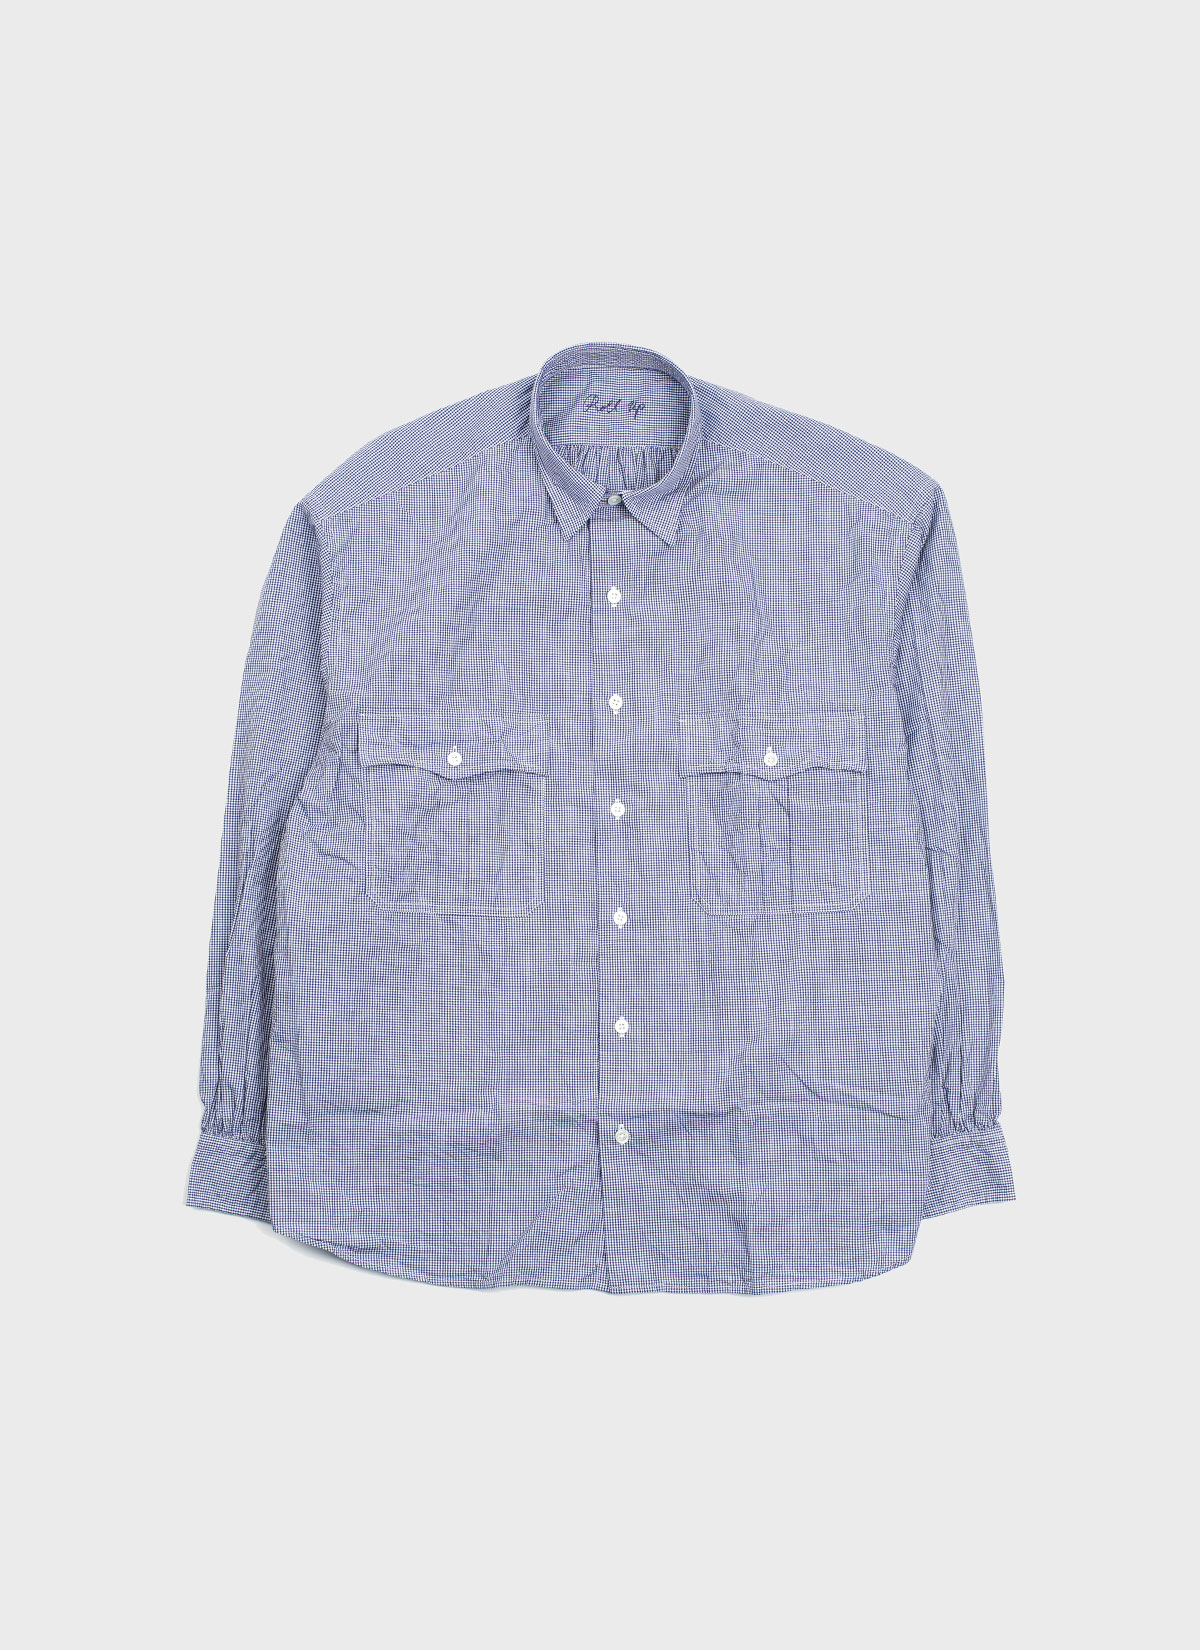 Roll Up New Gingham Check Shirt Navy